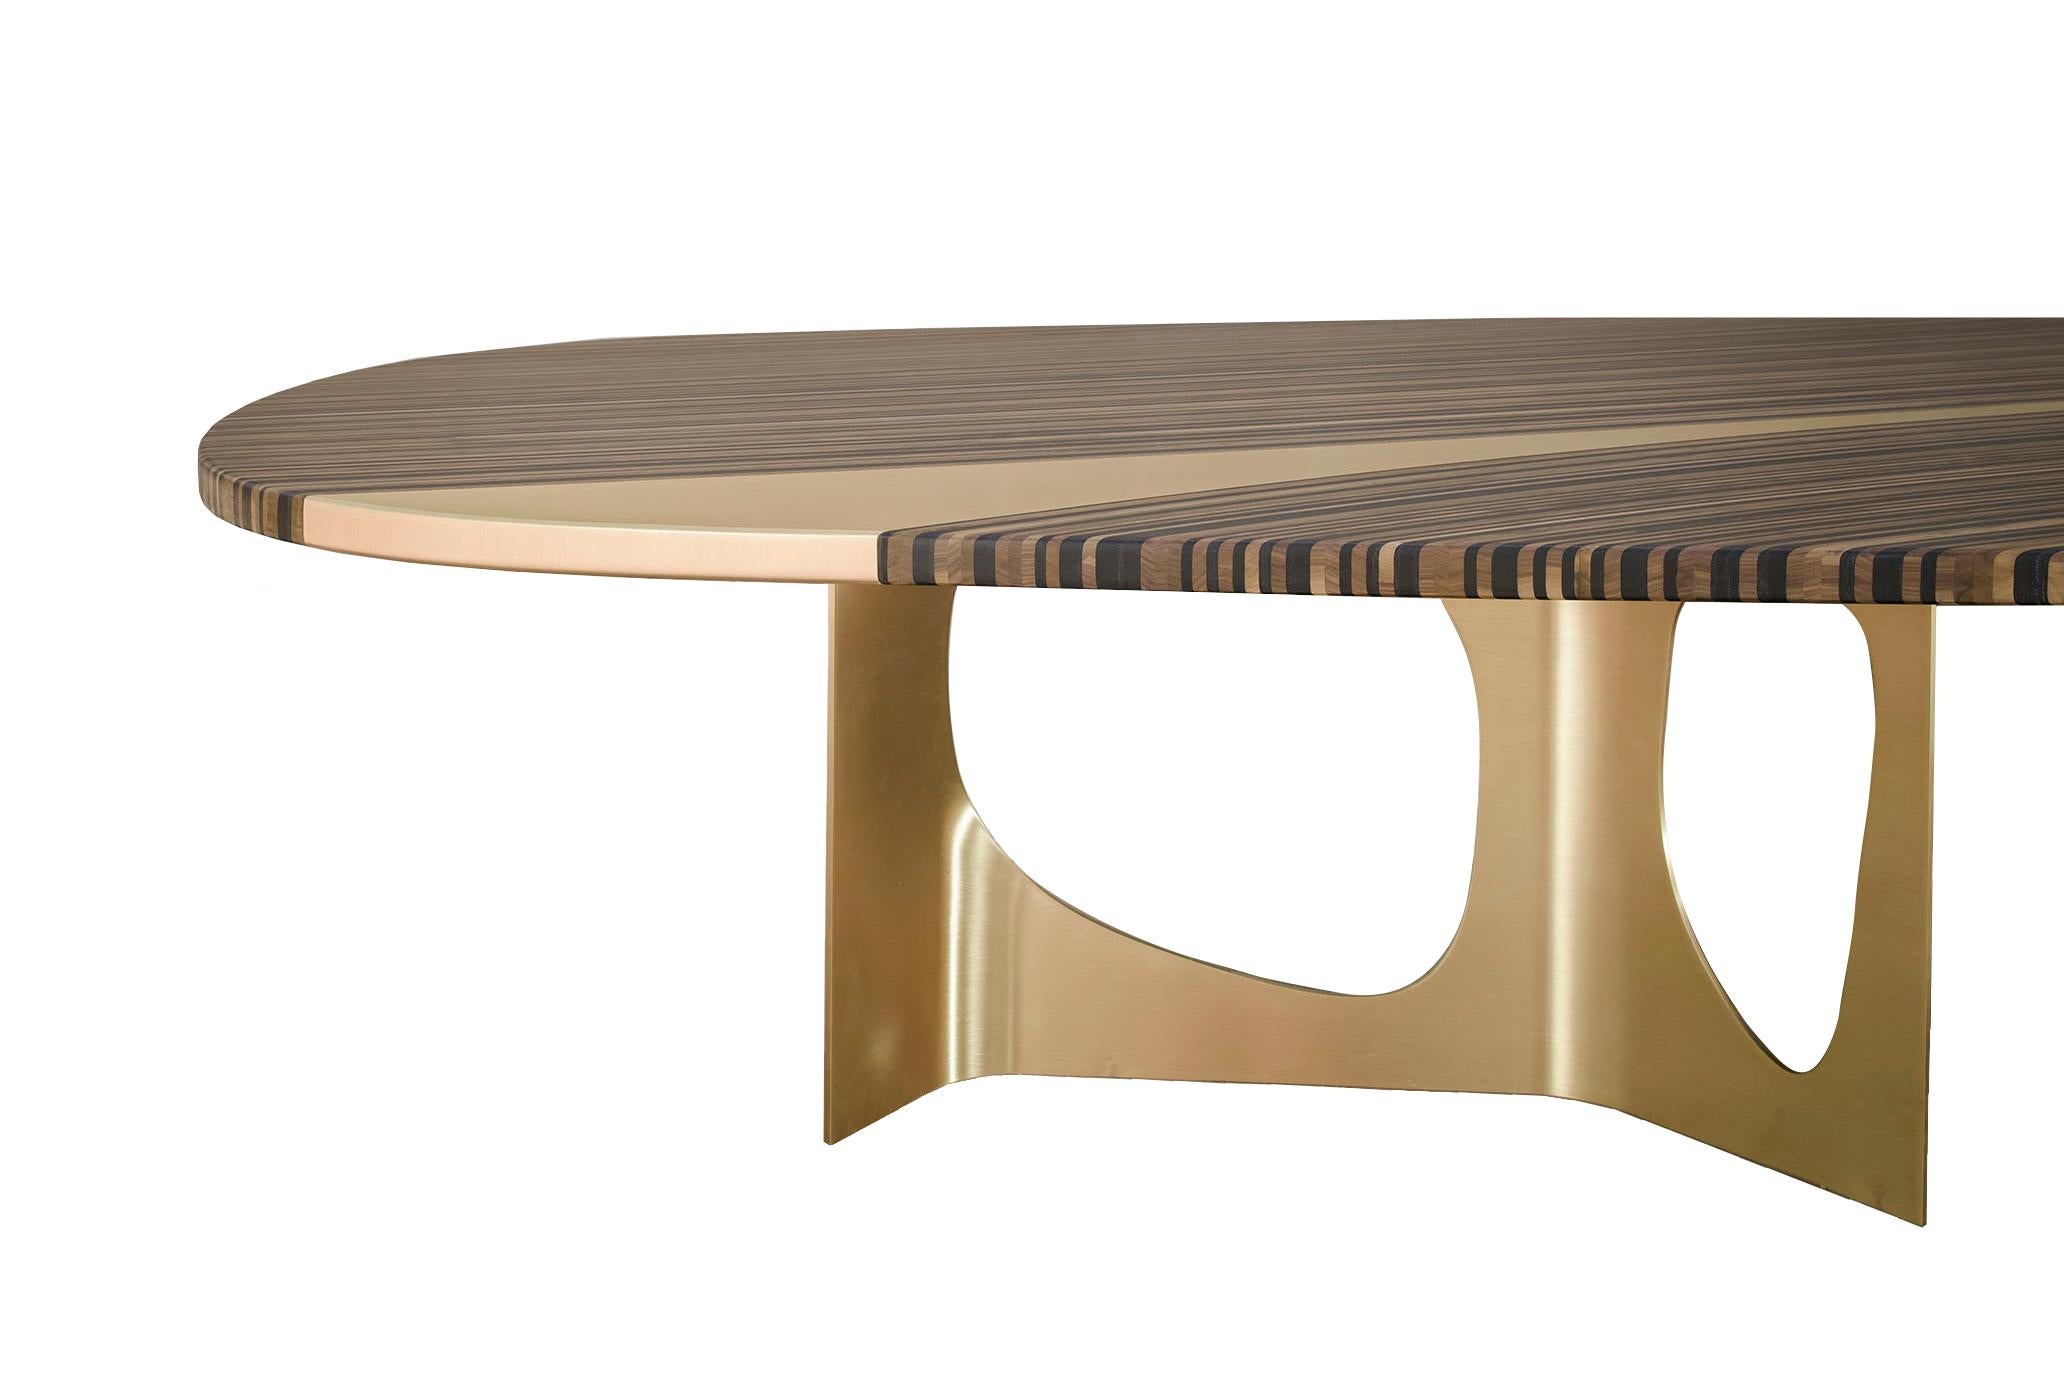 Infinity, Georges Mohasseb design, 2018
Inspired by the timeless designs of Art Deco and Art Nouveau, the Infinity dining table is designed to be an art piece. The tabletop is a solid wood top, veneered with multi-layered stripes of American Walnut